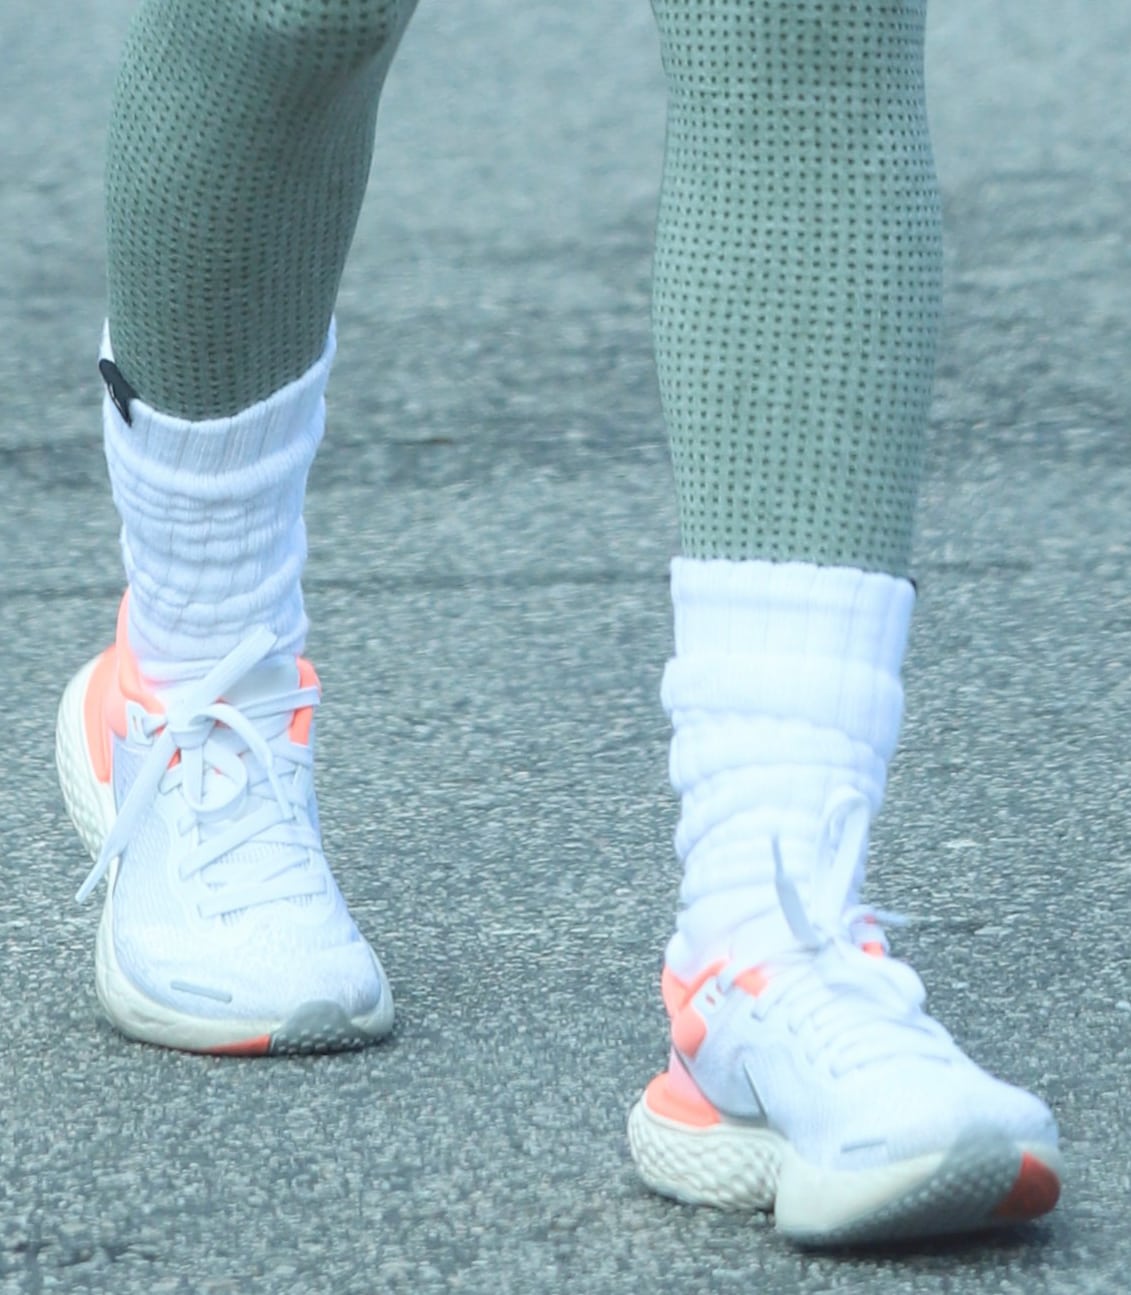 Eva Longoria completes her comfy athleisure with Nike Zoomx Invincible Run Flyknit sneakers